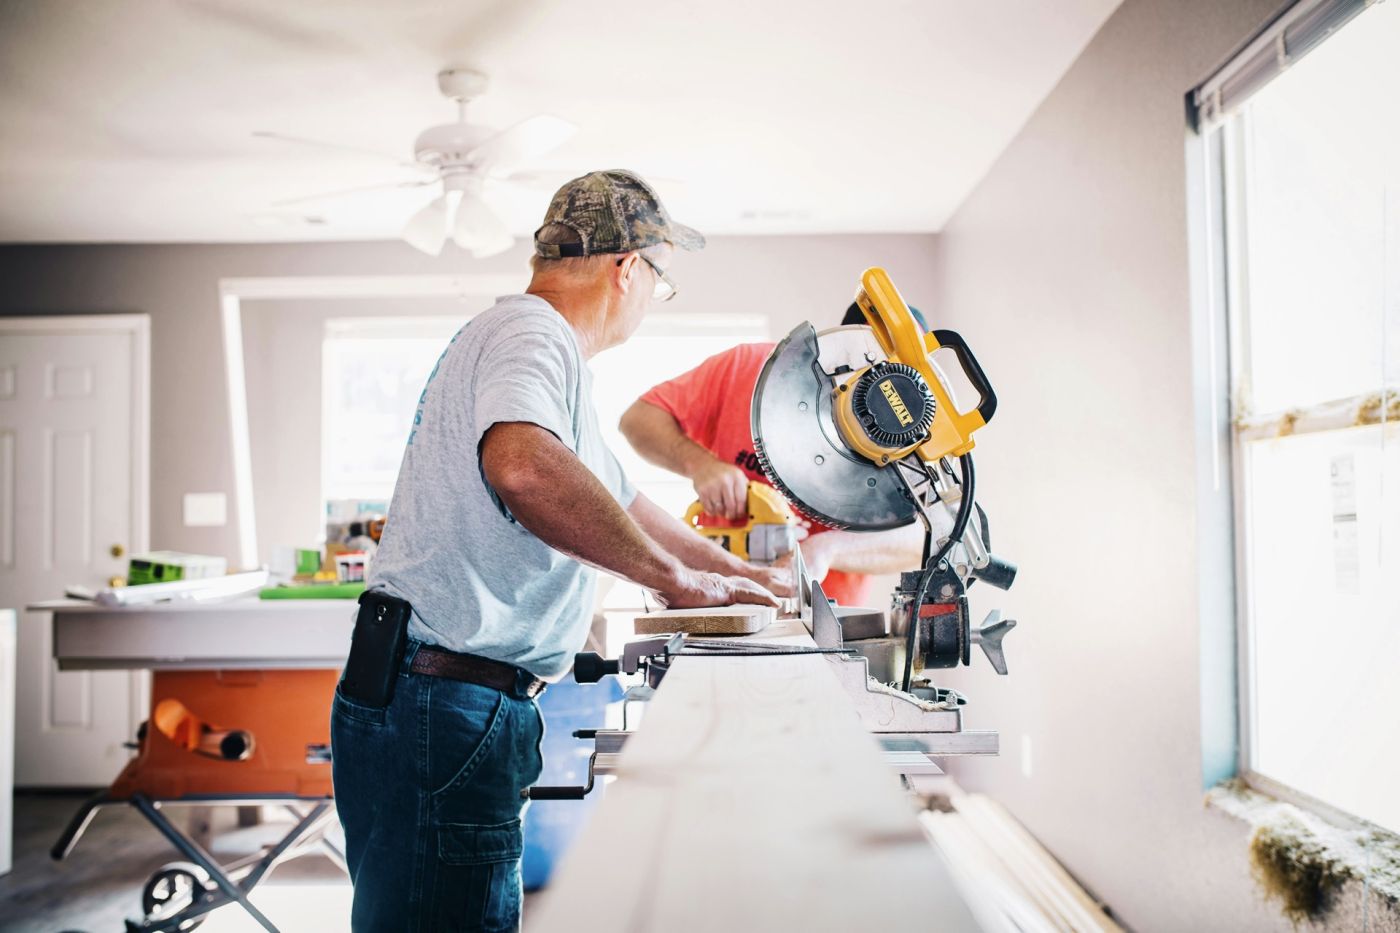 Home Remodel Survival Guide: What To Expect And How To Prepare